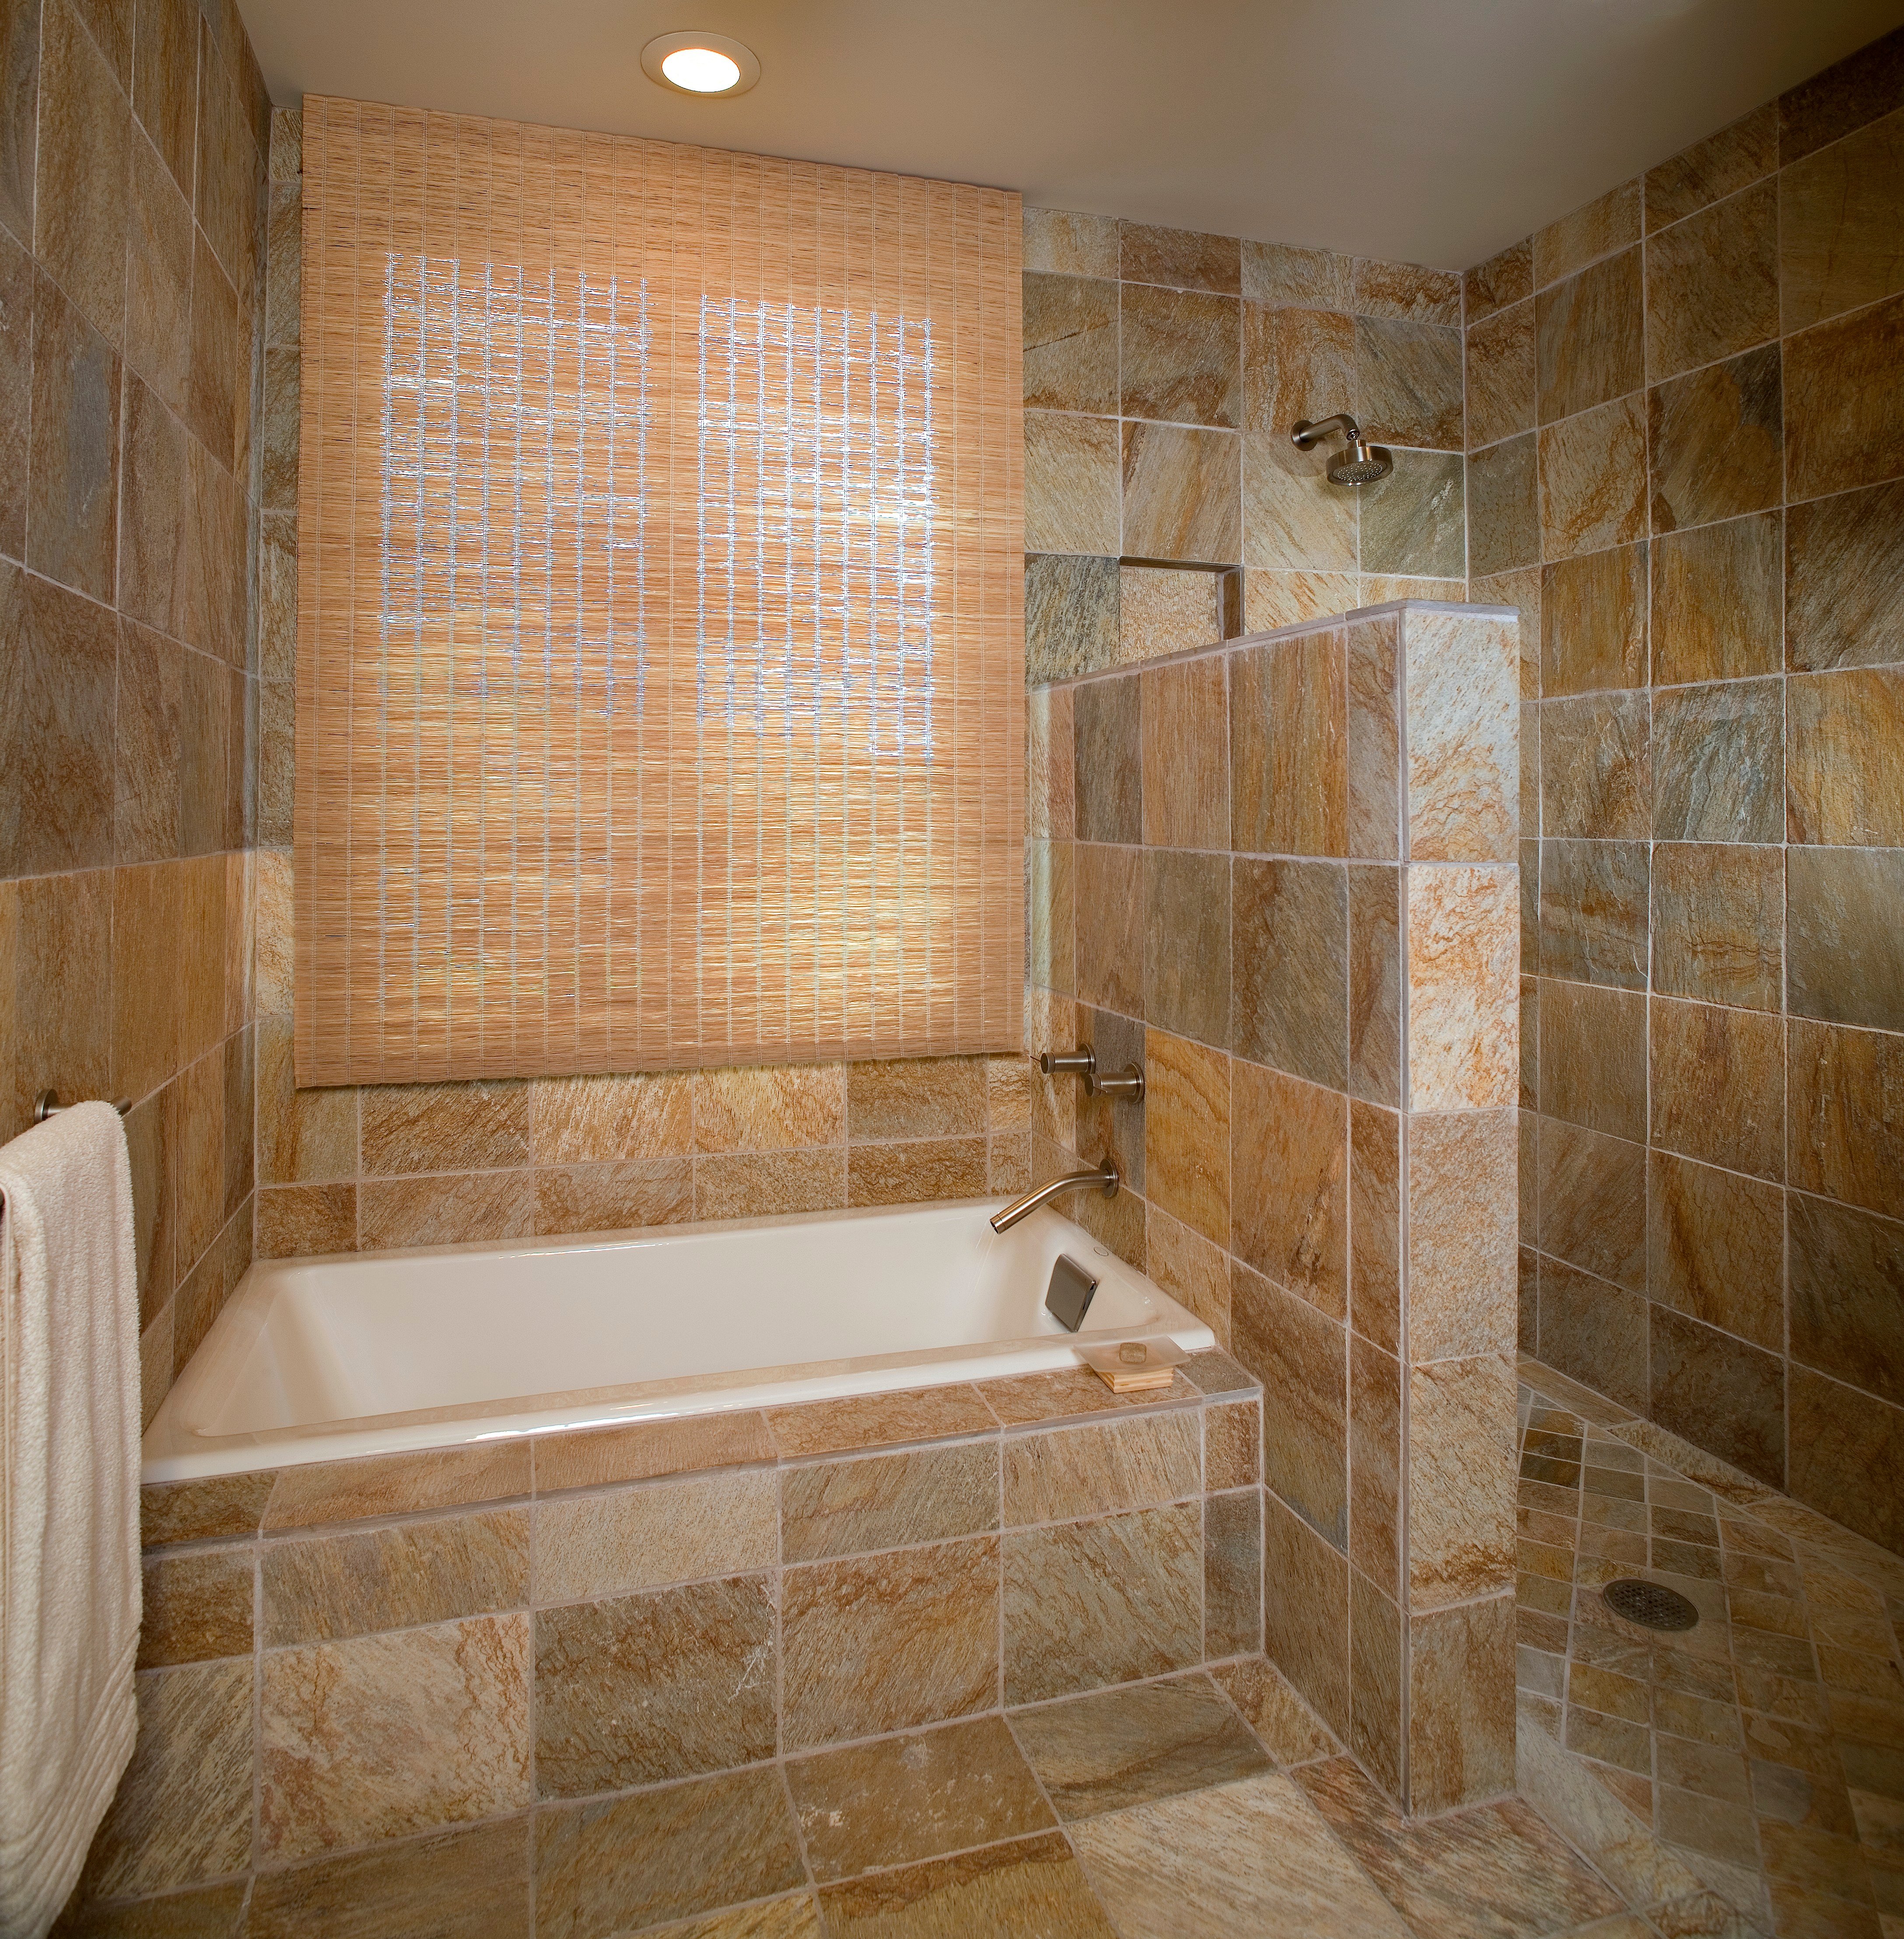 Where money is spend on bathroom remodels